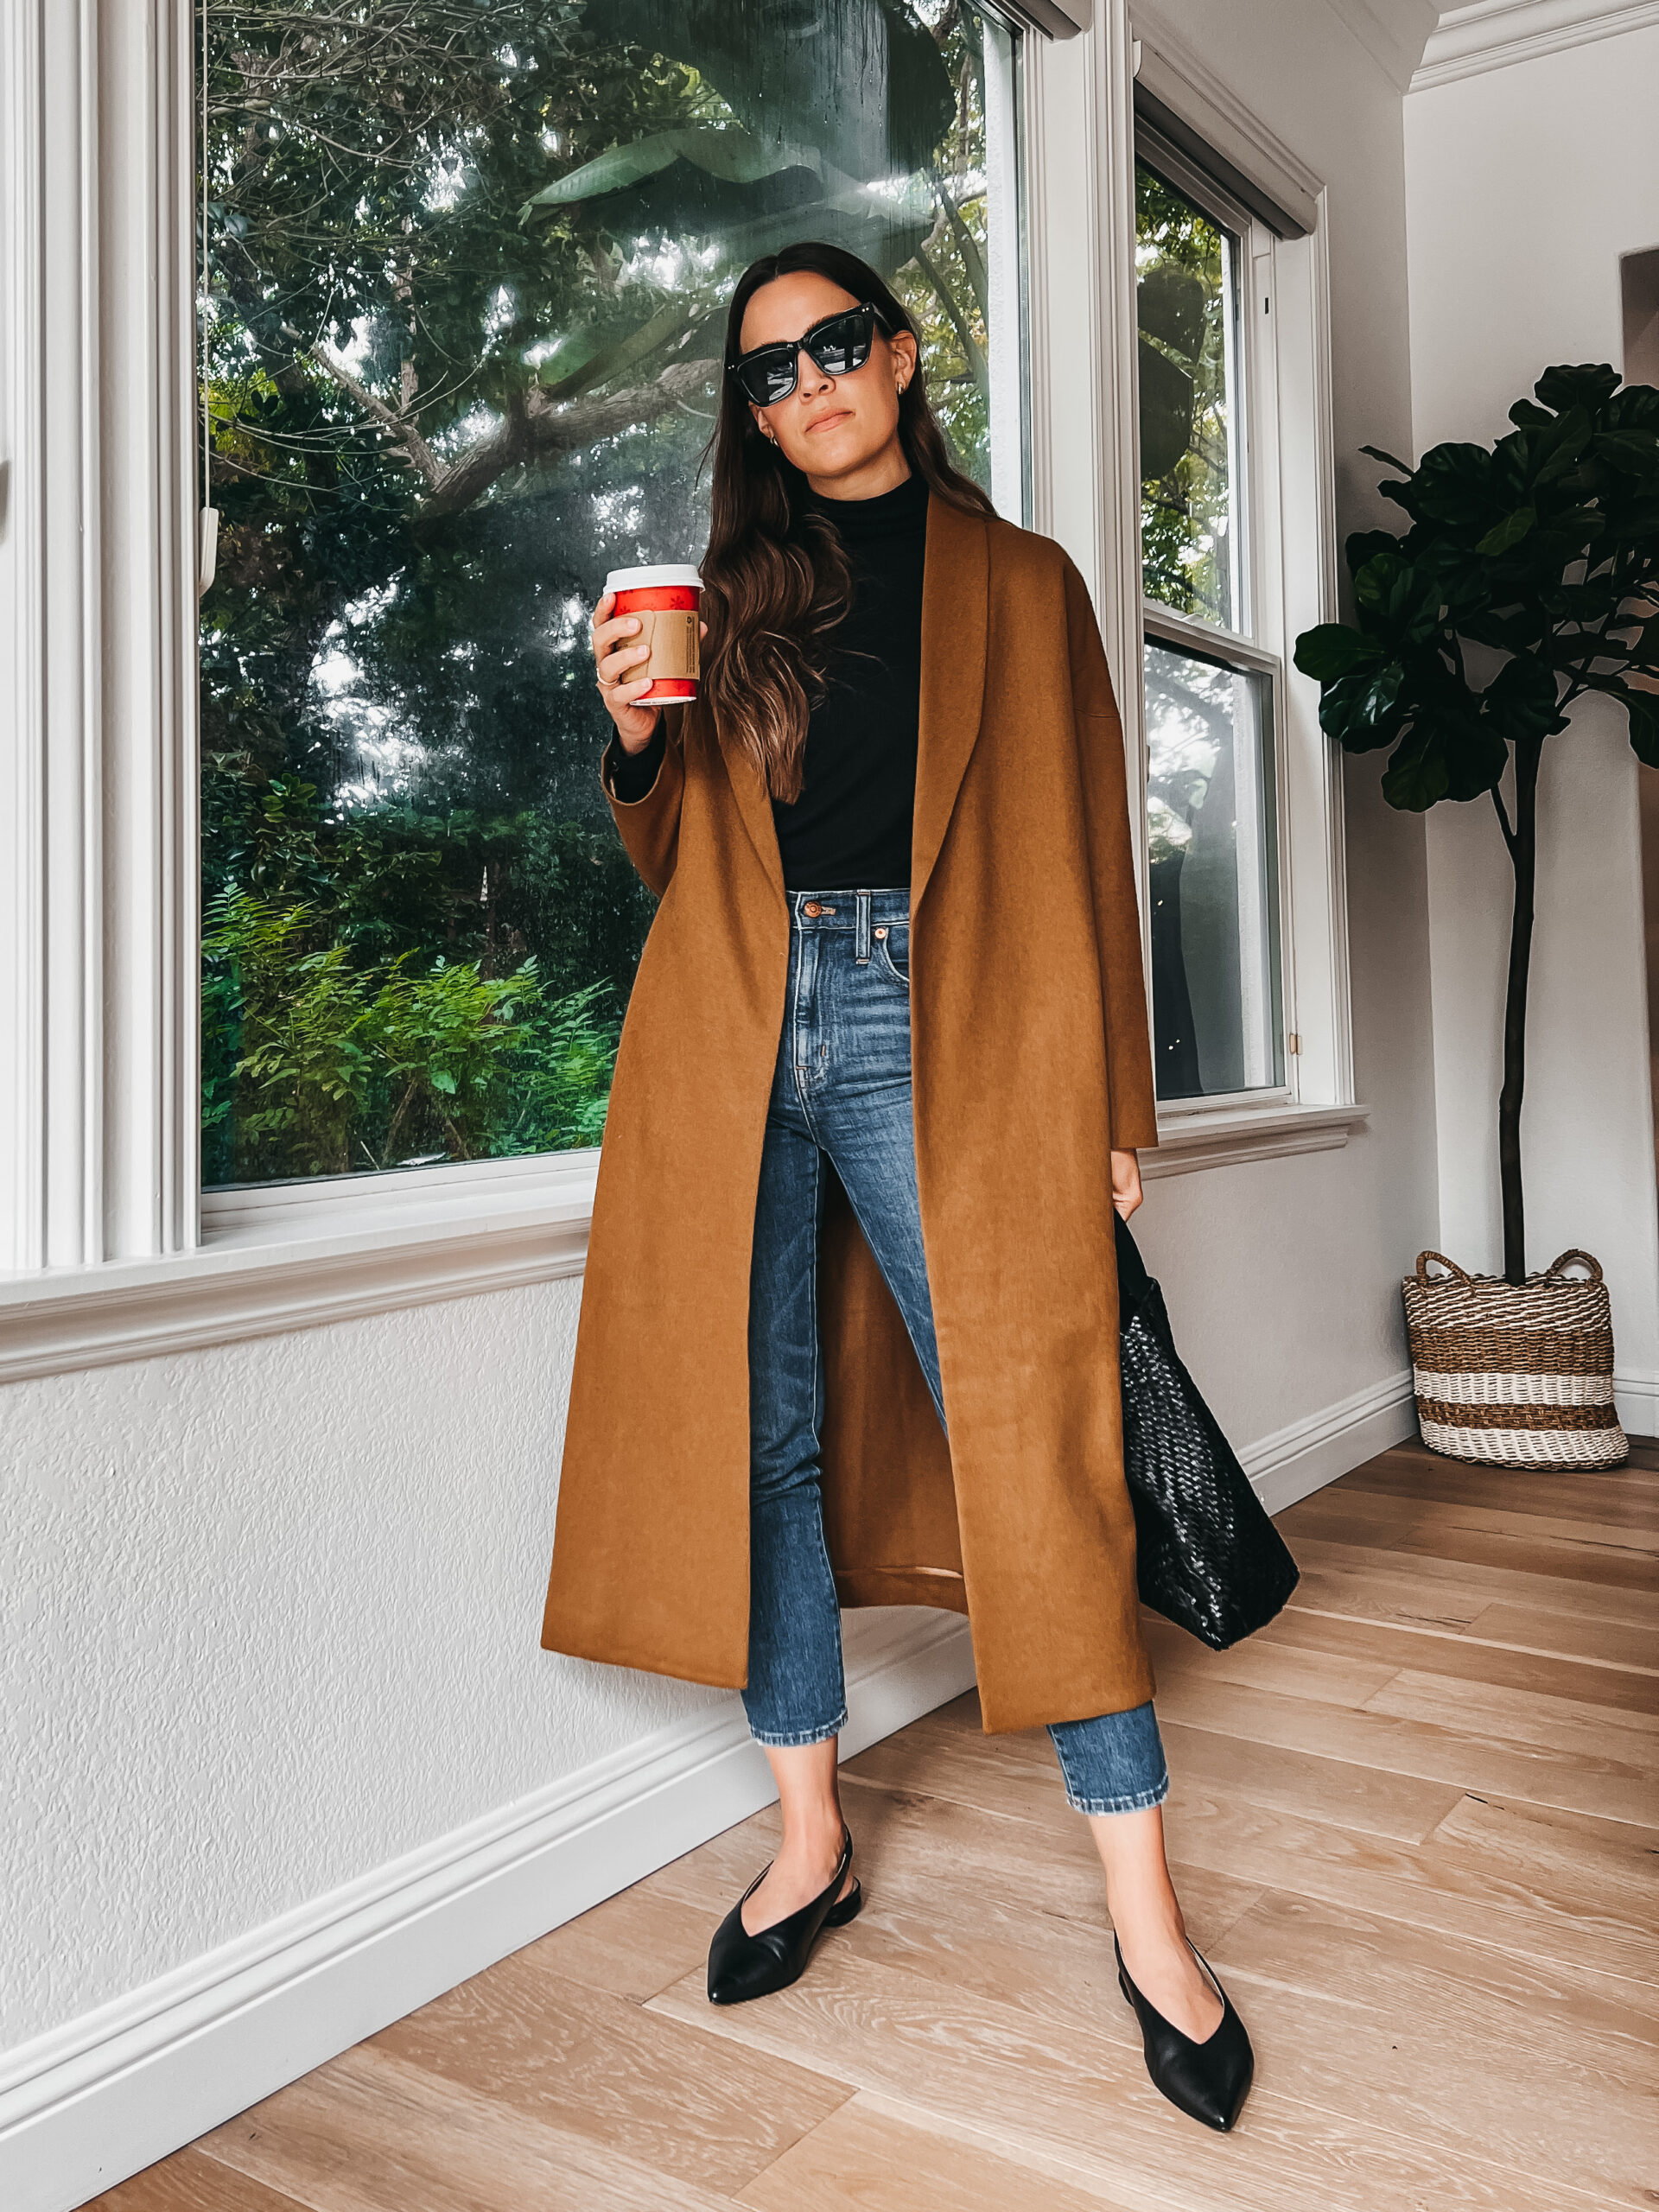 35 Minimalist Outfits For Summer 2022 - Styleoholic